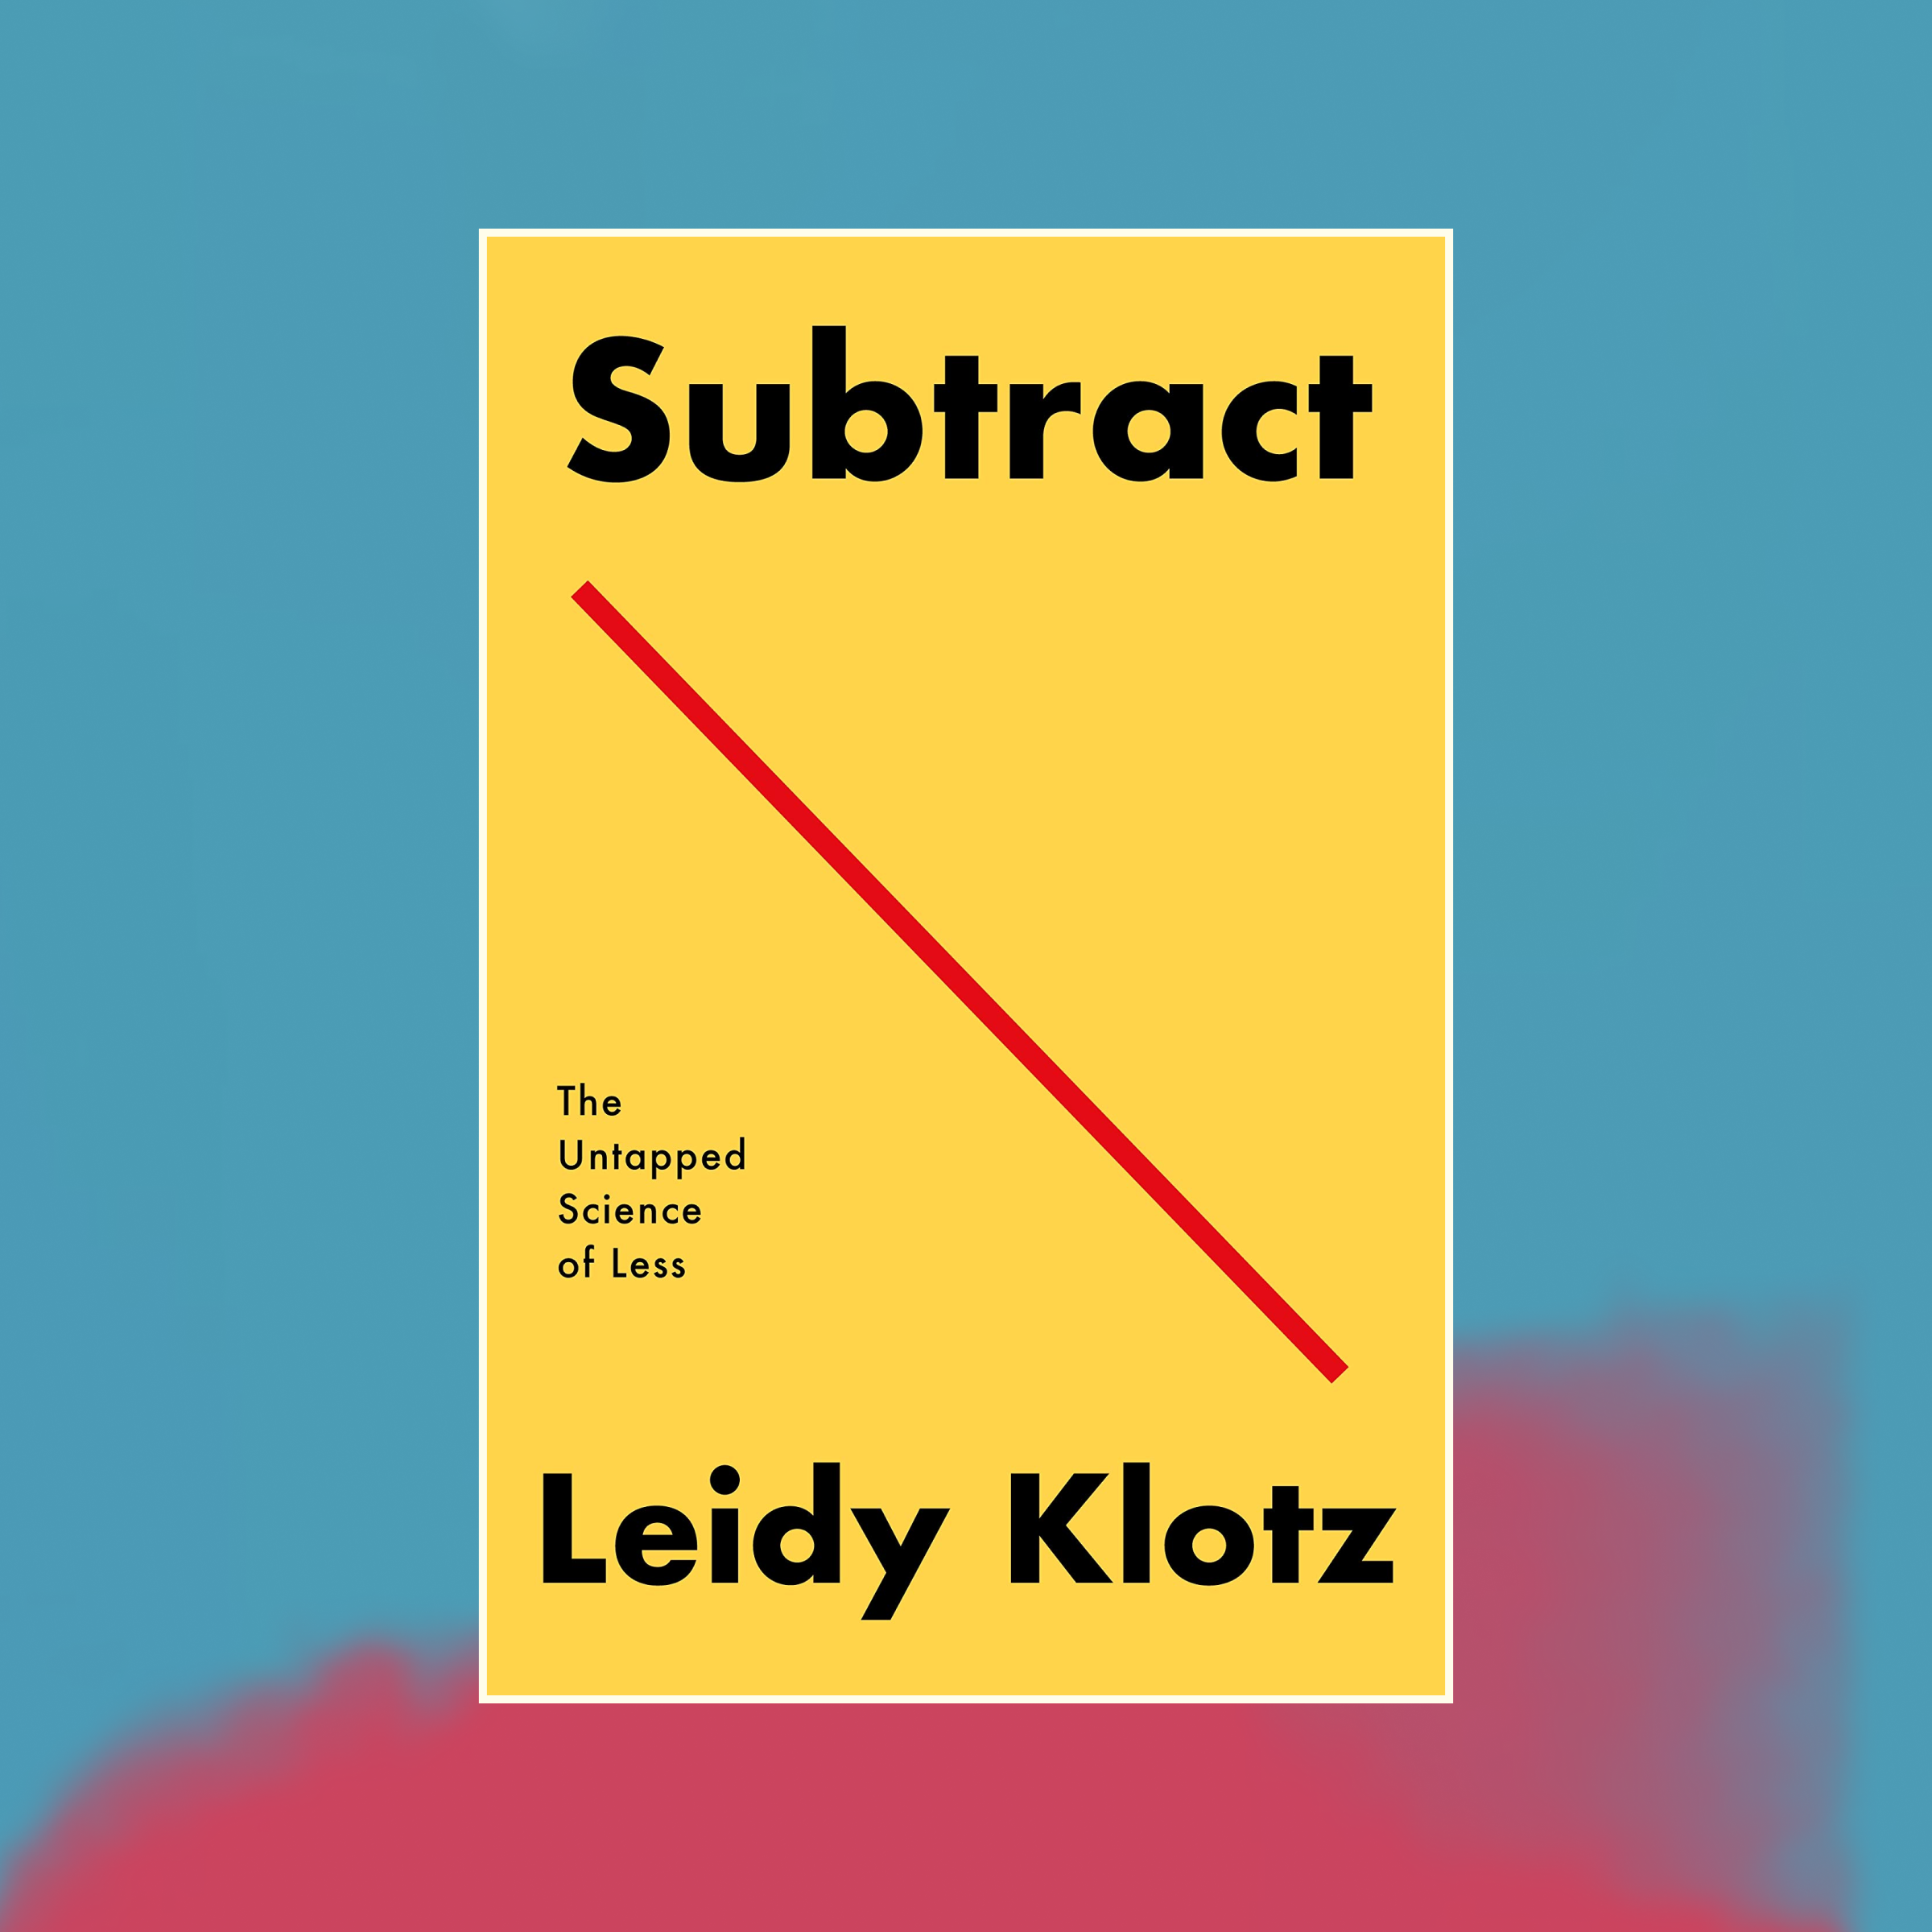 Book cover of Subtract against an abstract painted background